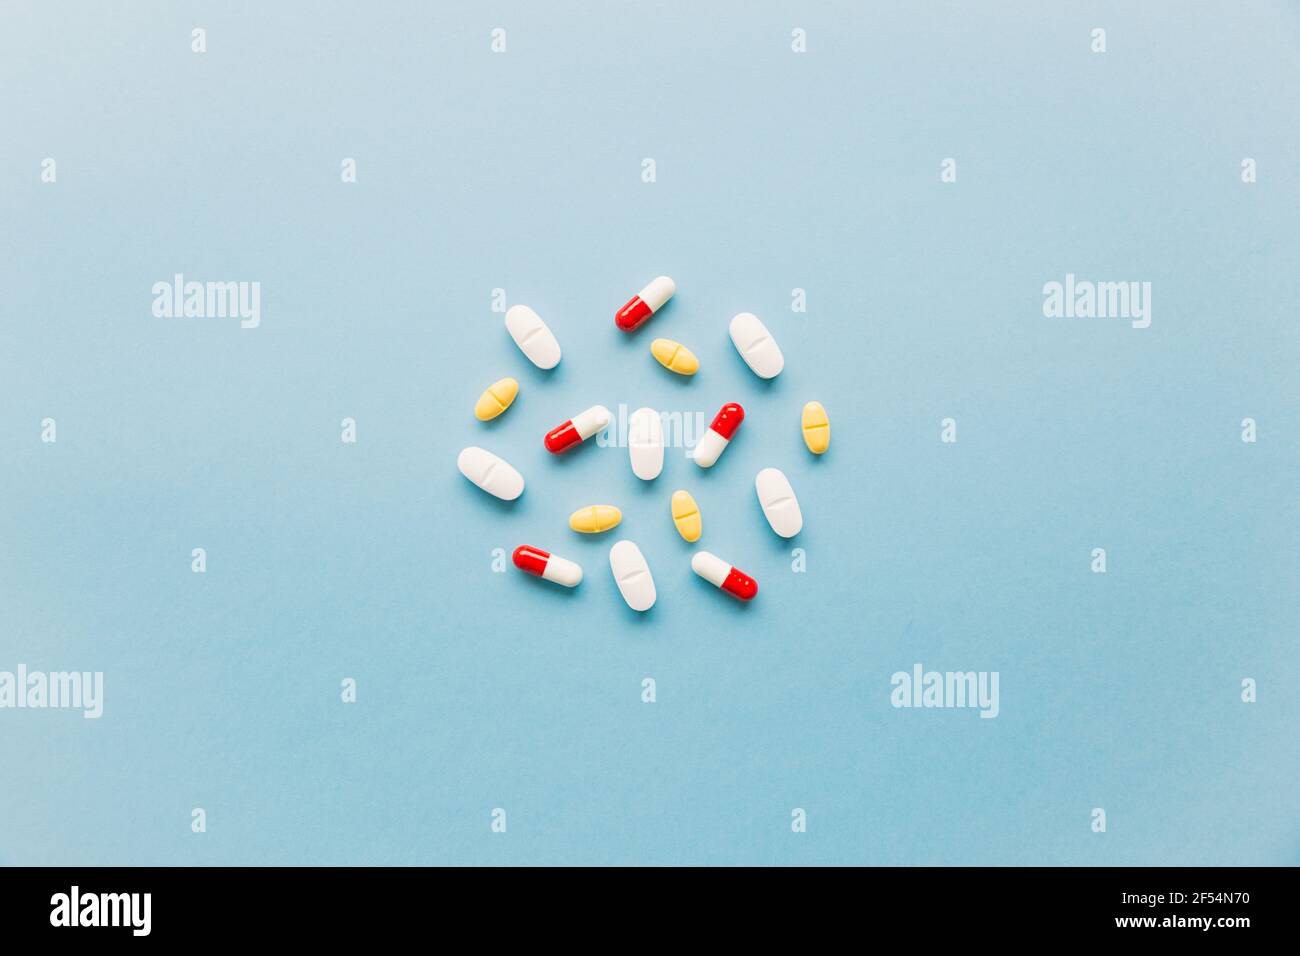 group of different medicinal pills on a blue background Stock Photo